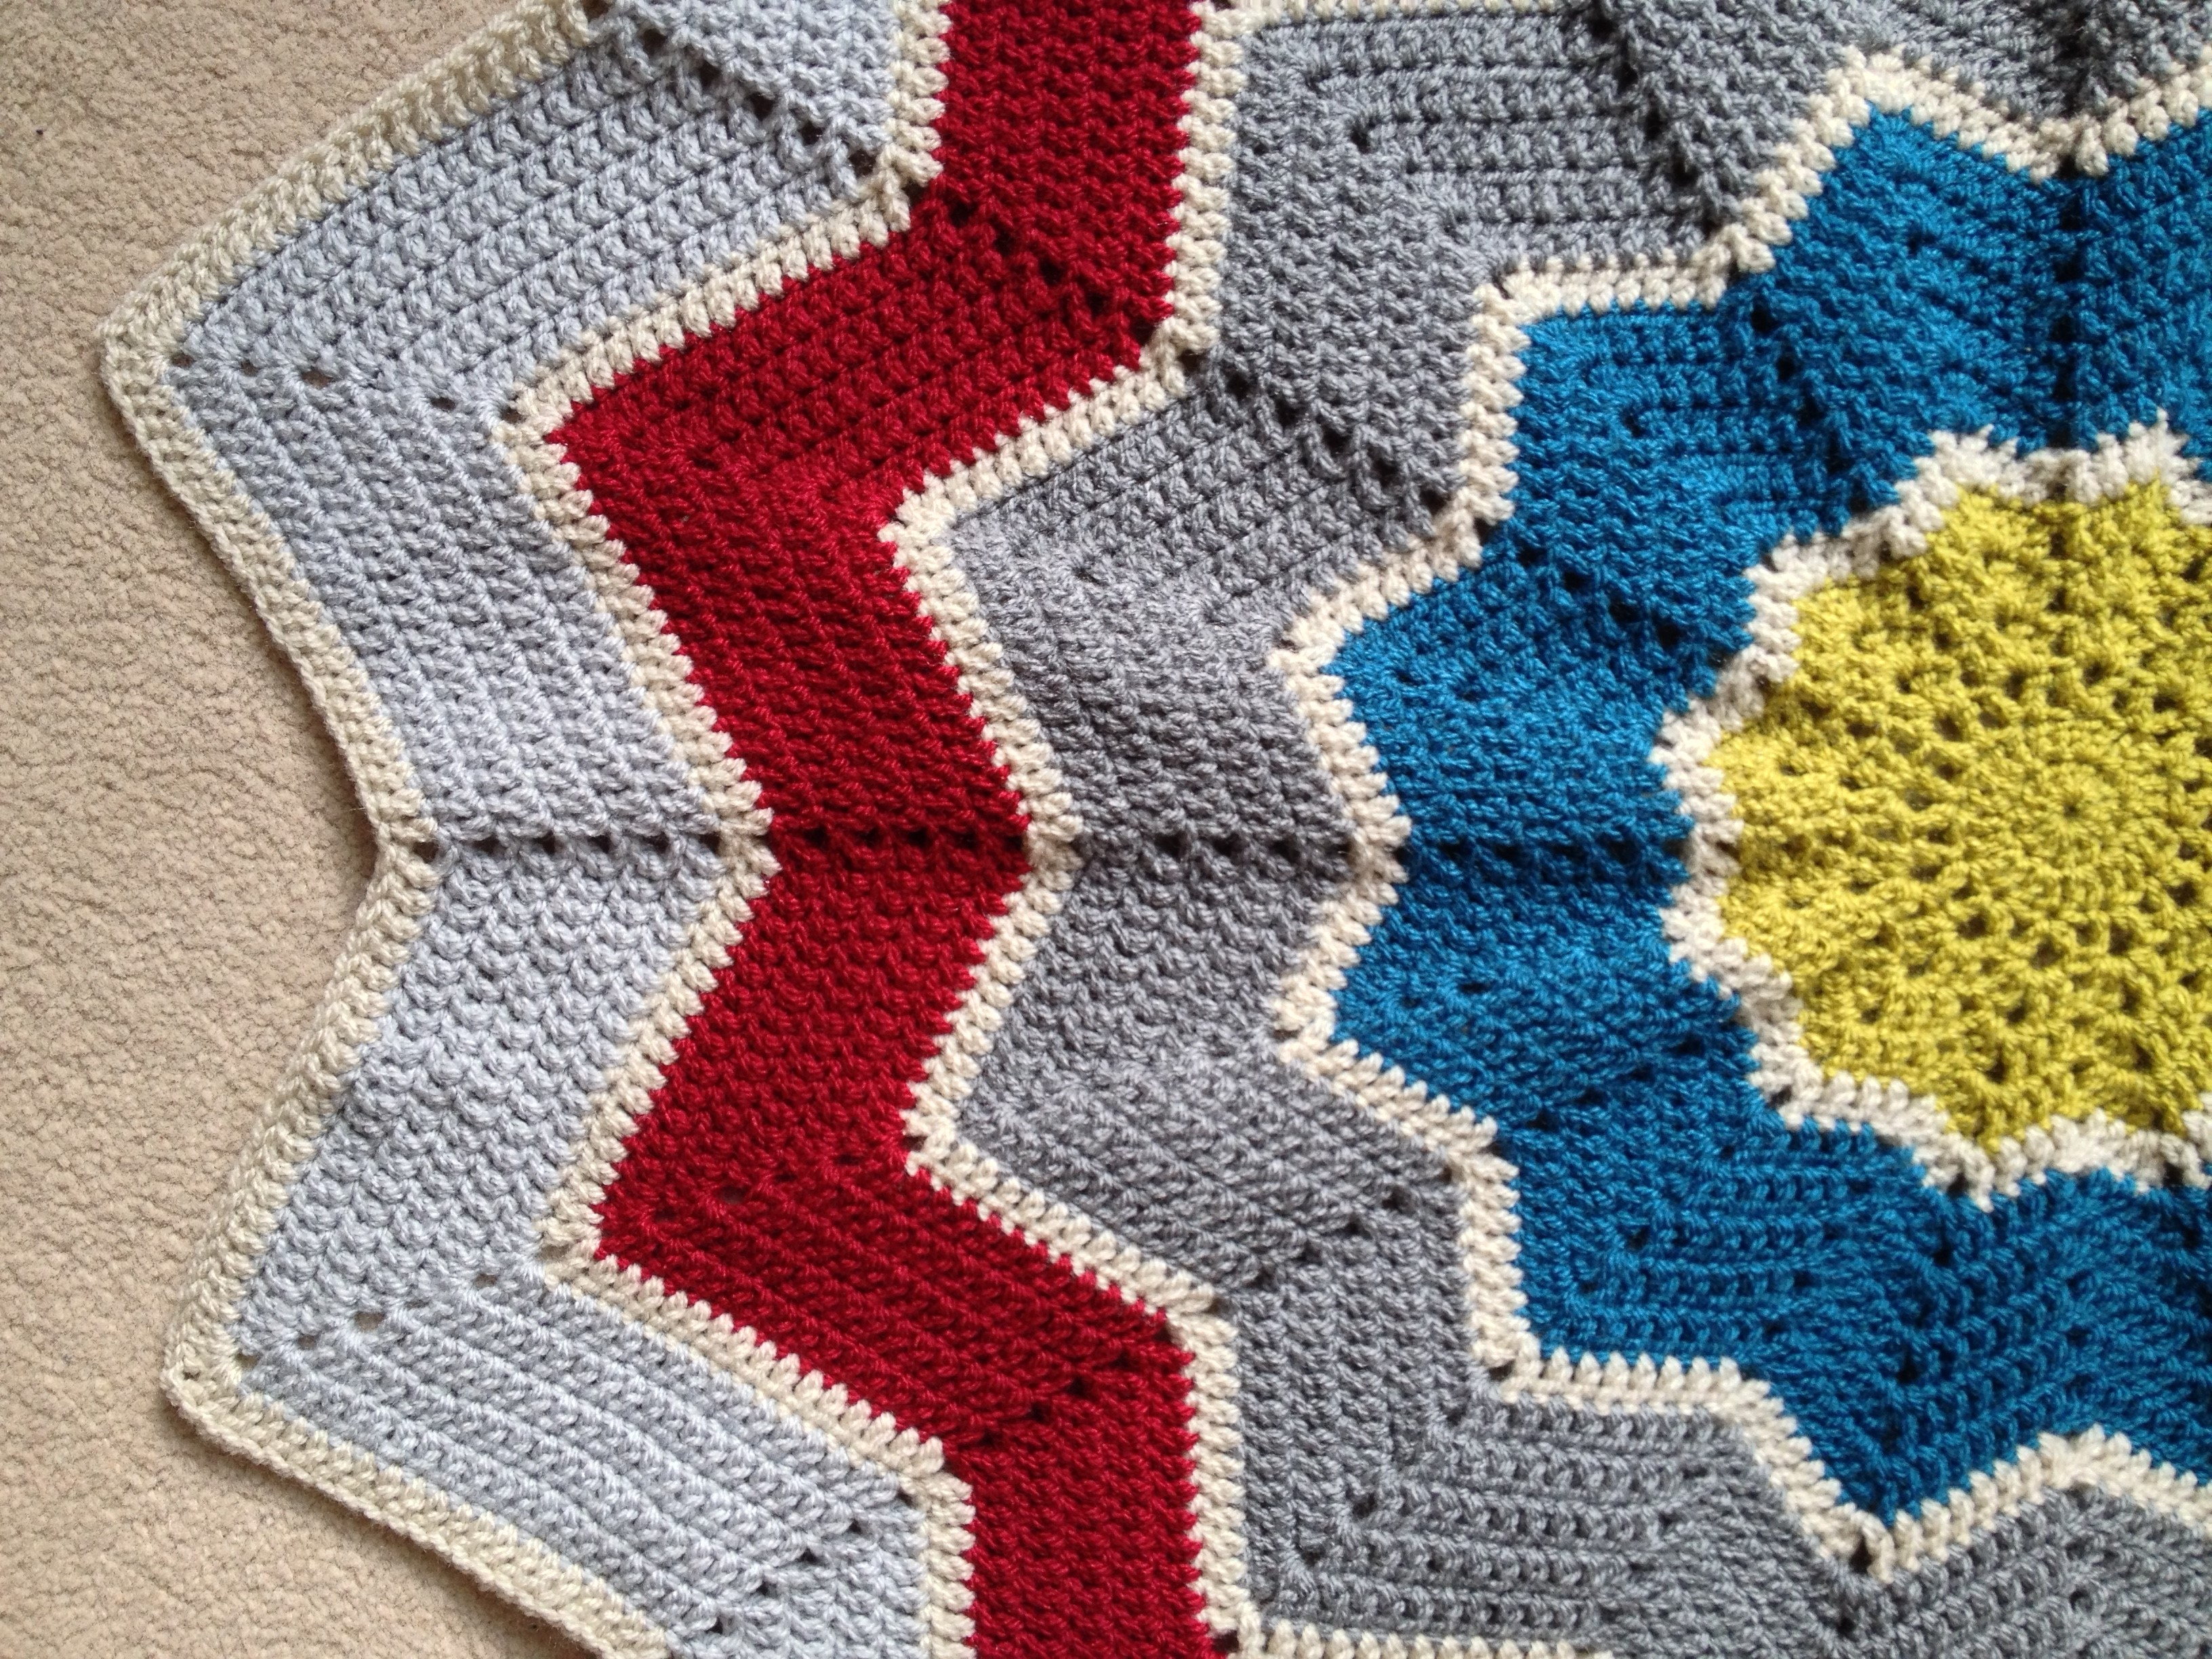 Star Baby Blanket Crochet Pattern 12 Pointed Star Ripple Blanketfinished The Little Room Of Rachell